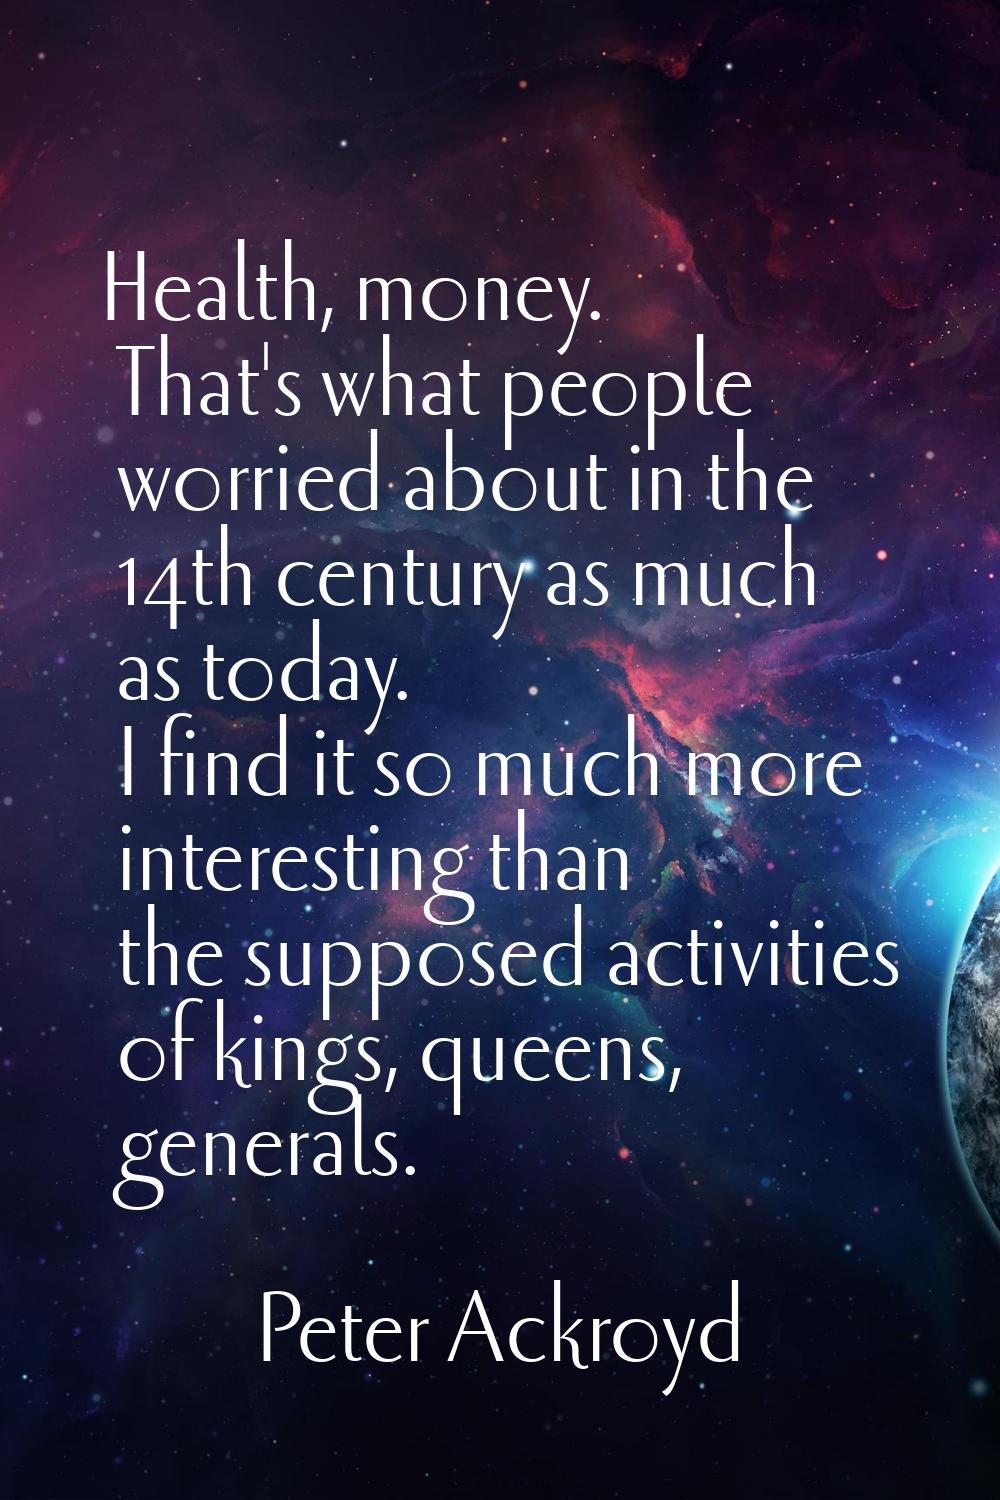 Health, money. That's what people worried about in the 14th century as much as today. I find it so 